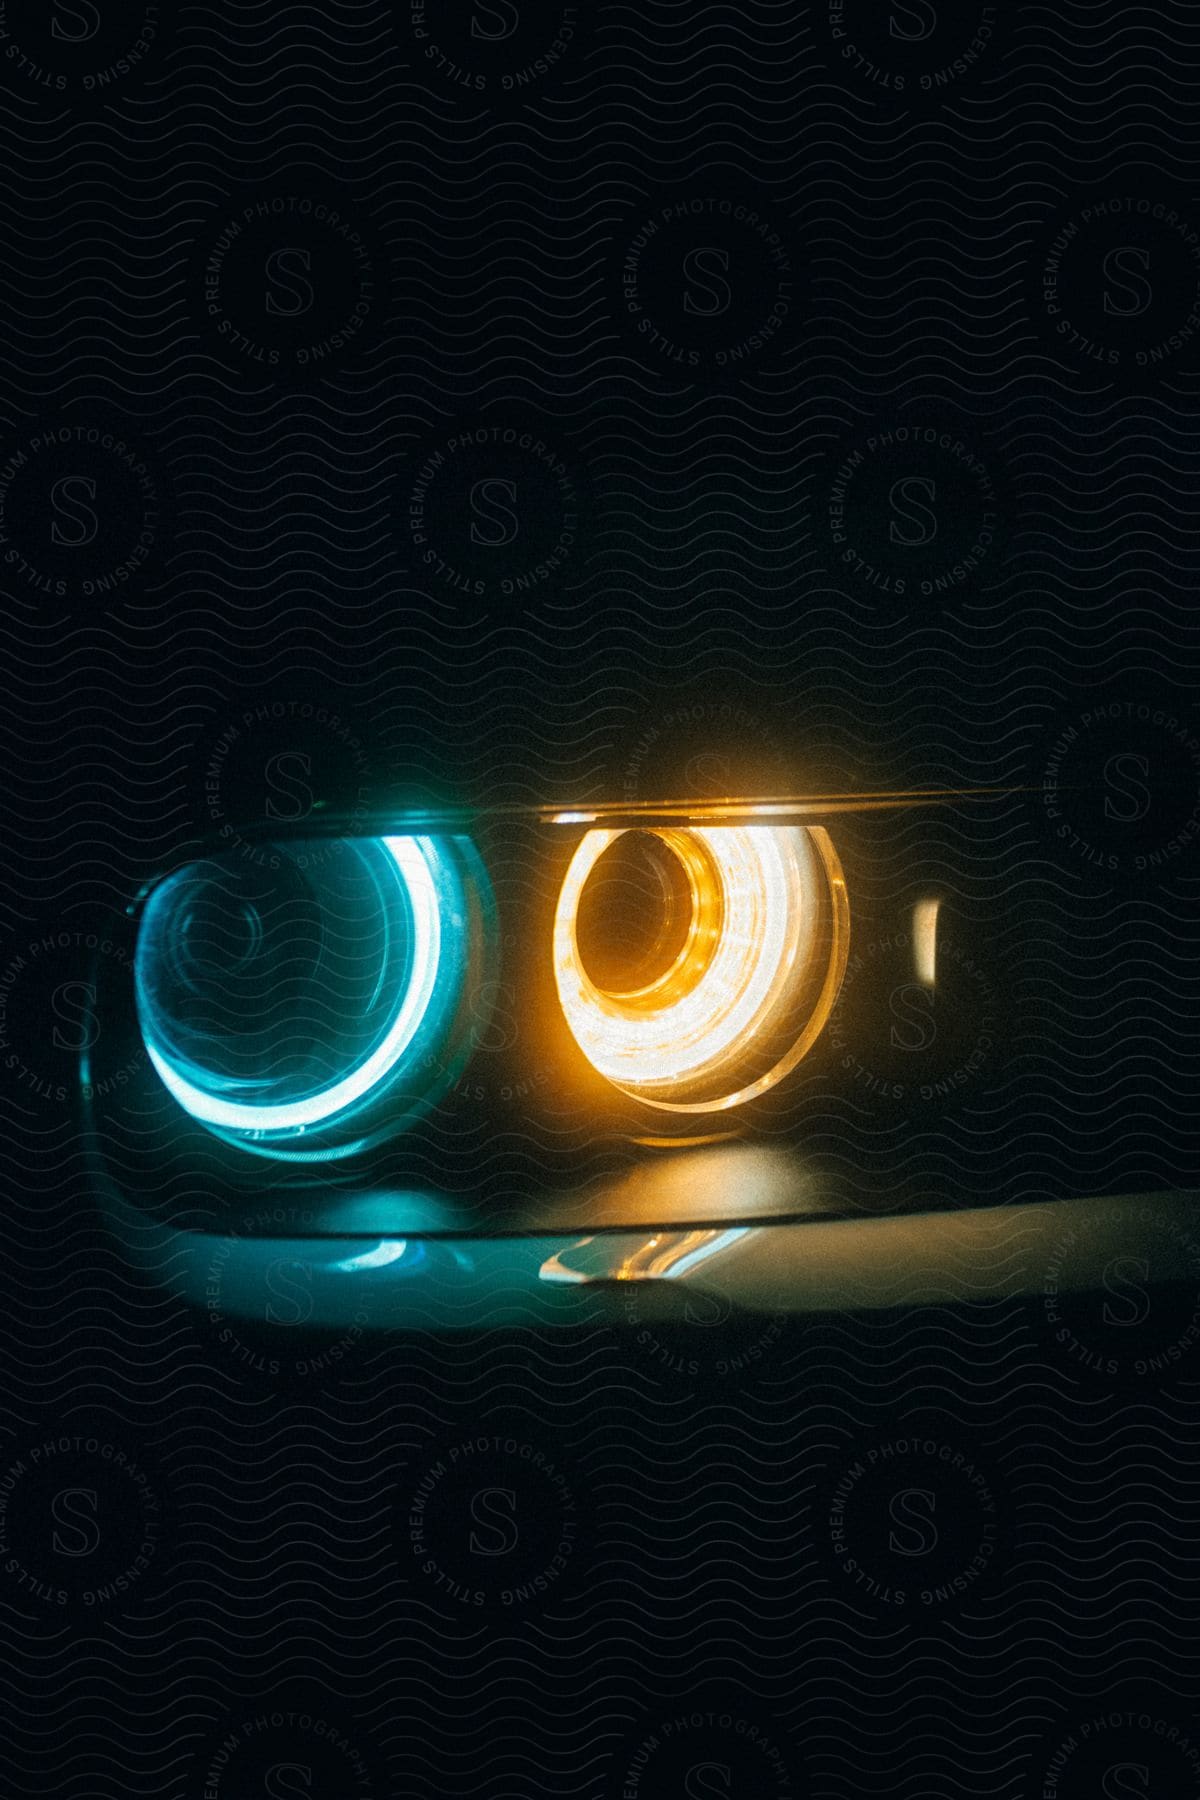 A closeup of orange and blue halo headlights on a car at night